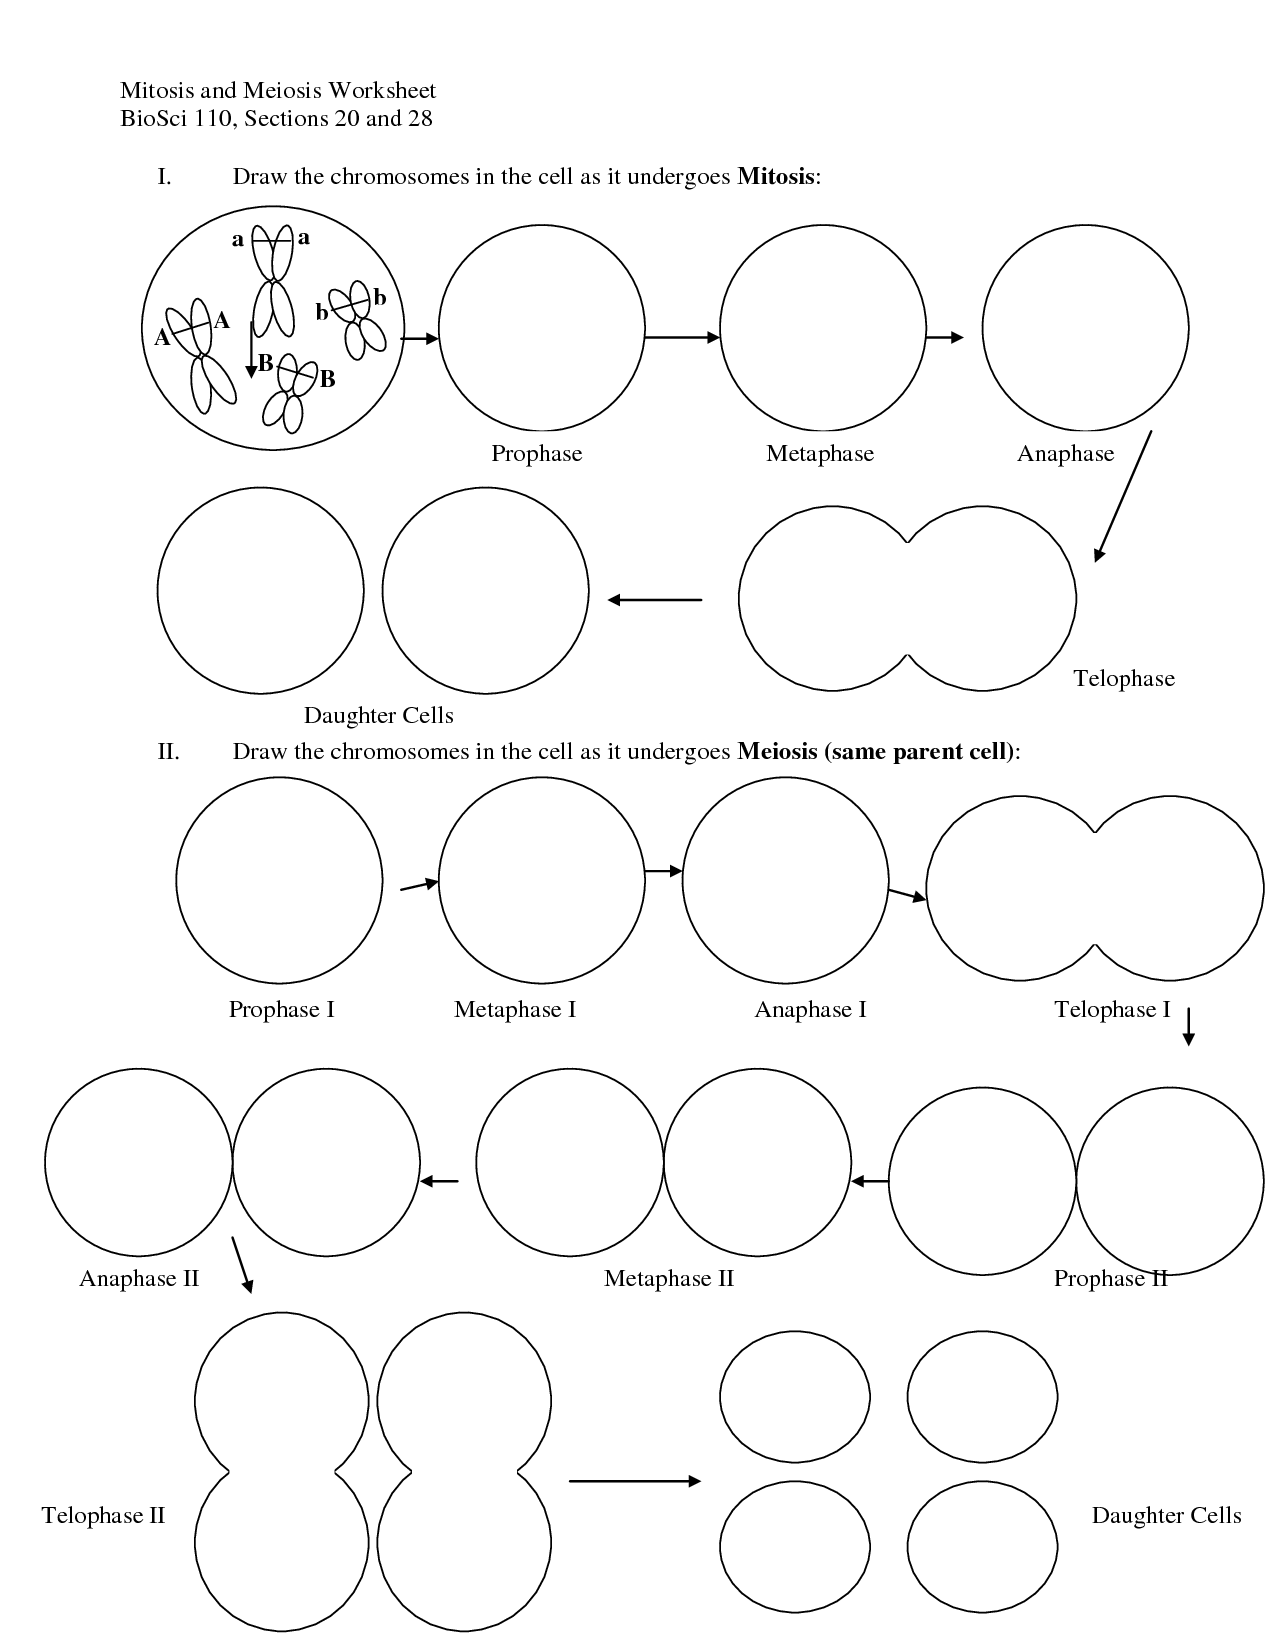 Meiosis and Mitosis Worksheet Answers Image